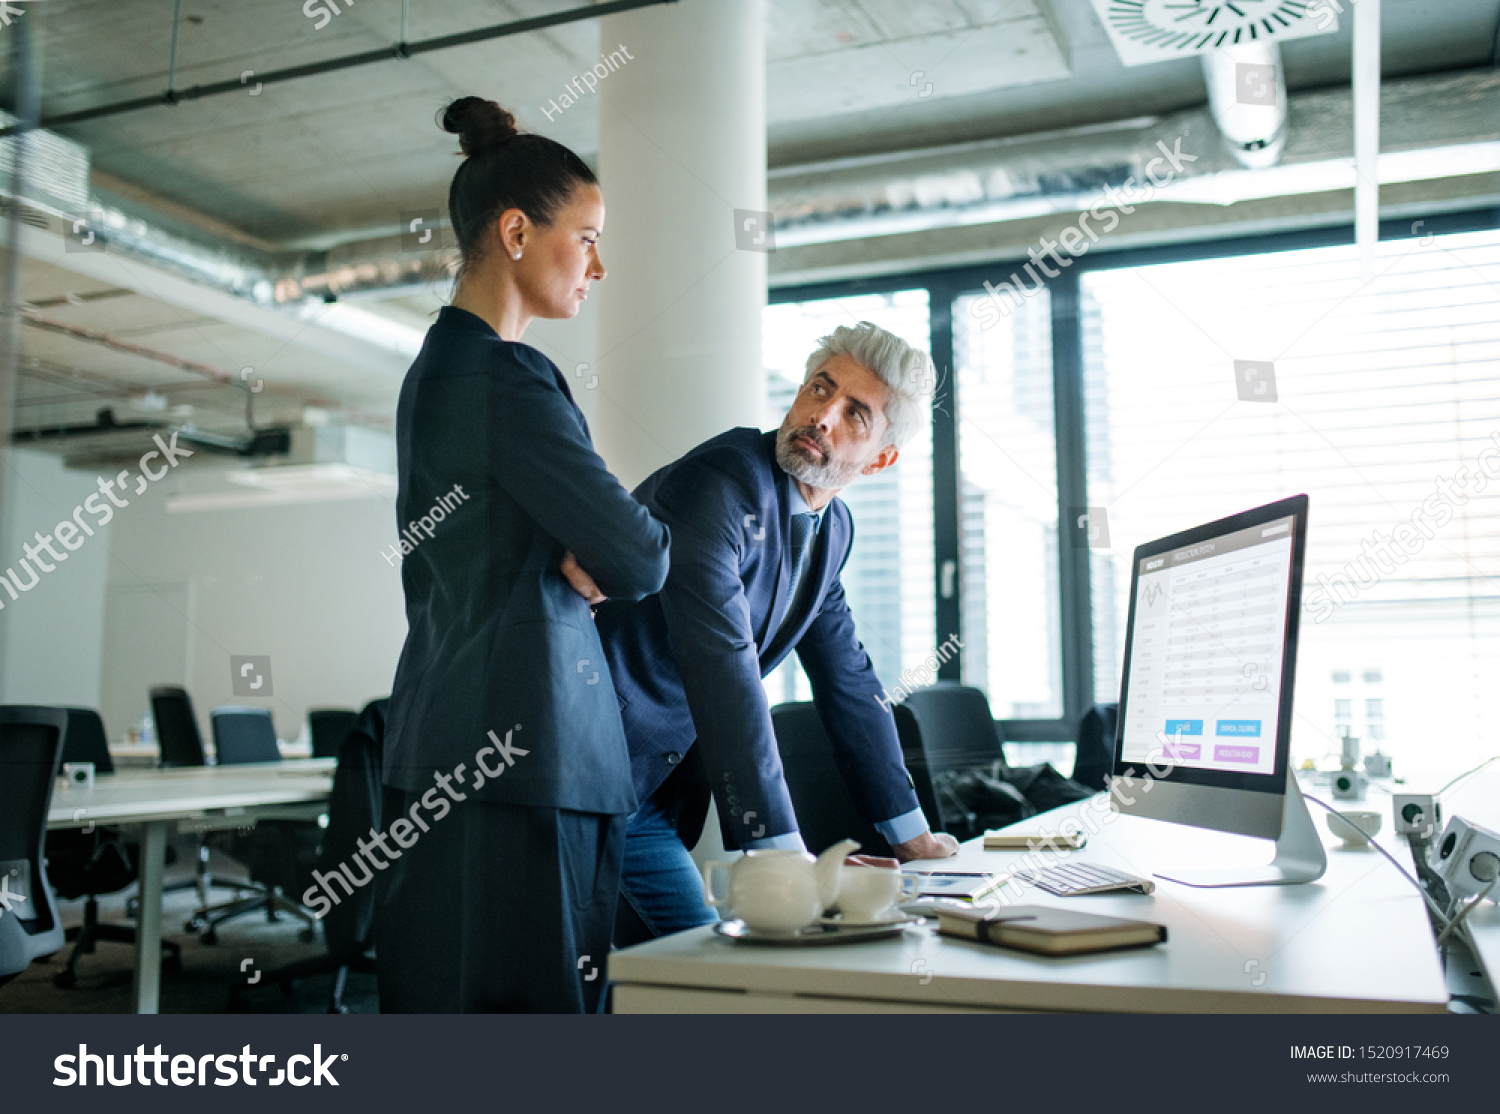 Two businesspeople with computer standing in an office at desk, working. #1520917469